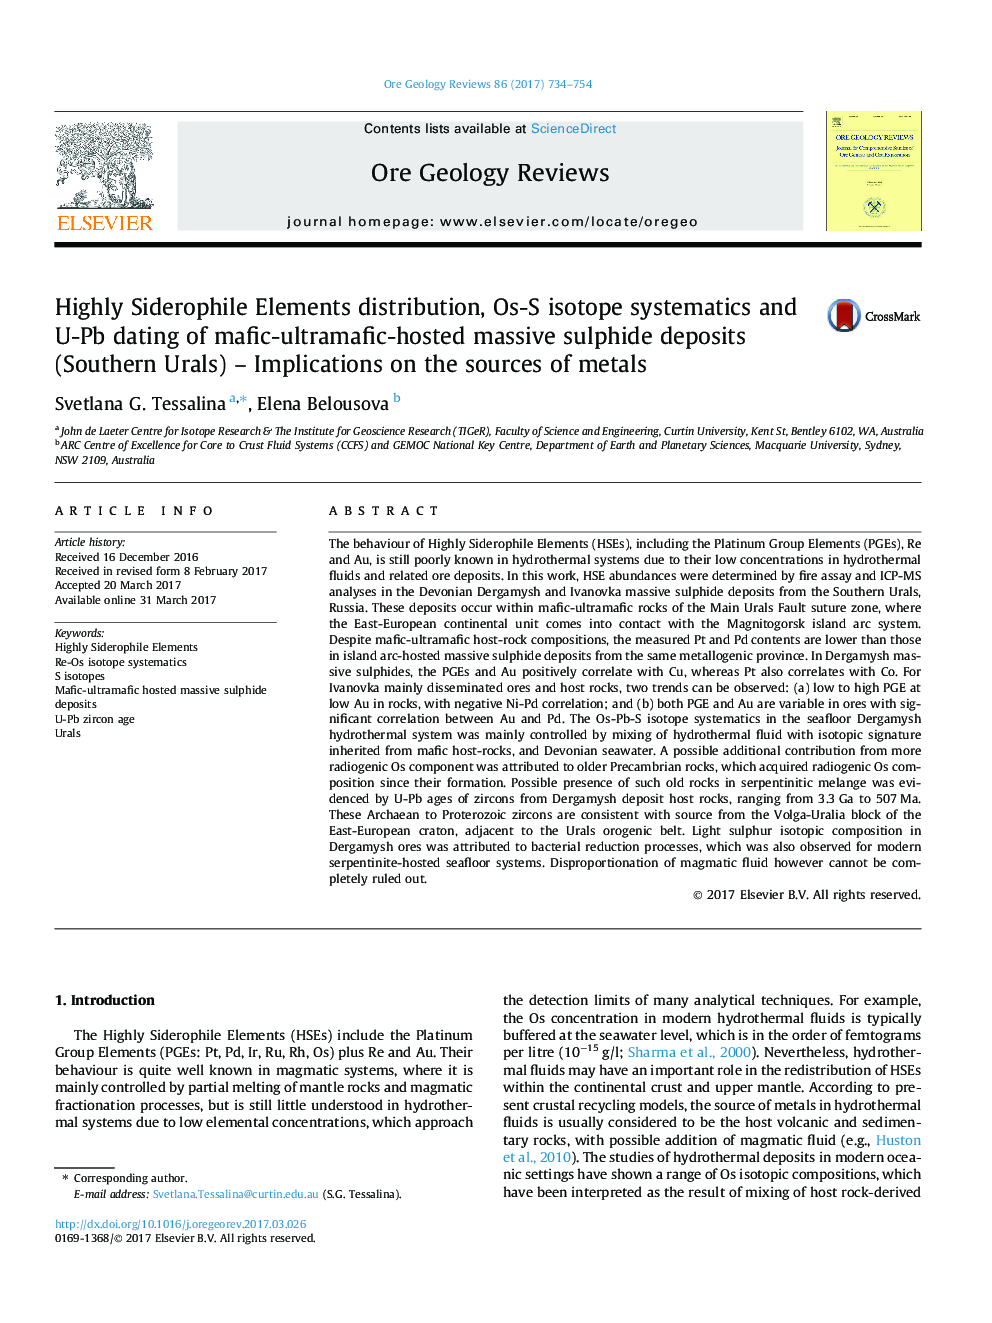 Highly Siderophile Elements distribution, Os-S isotope systematics and U-Pb dating of mafic-ultramafic-hosted massive sulphide deposits (Southern Urals) - Implications on the sources of metals